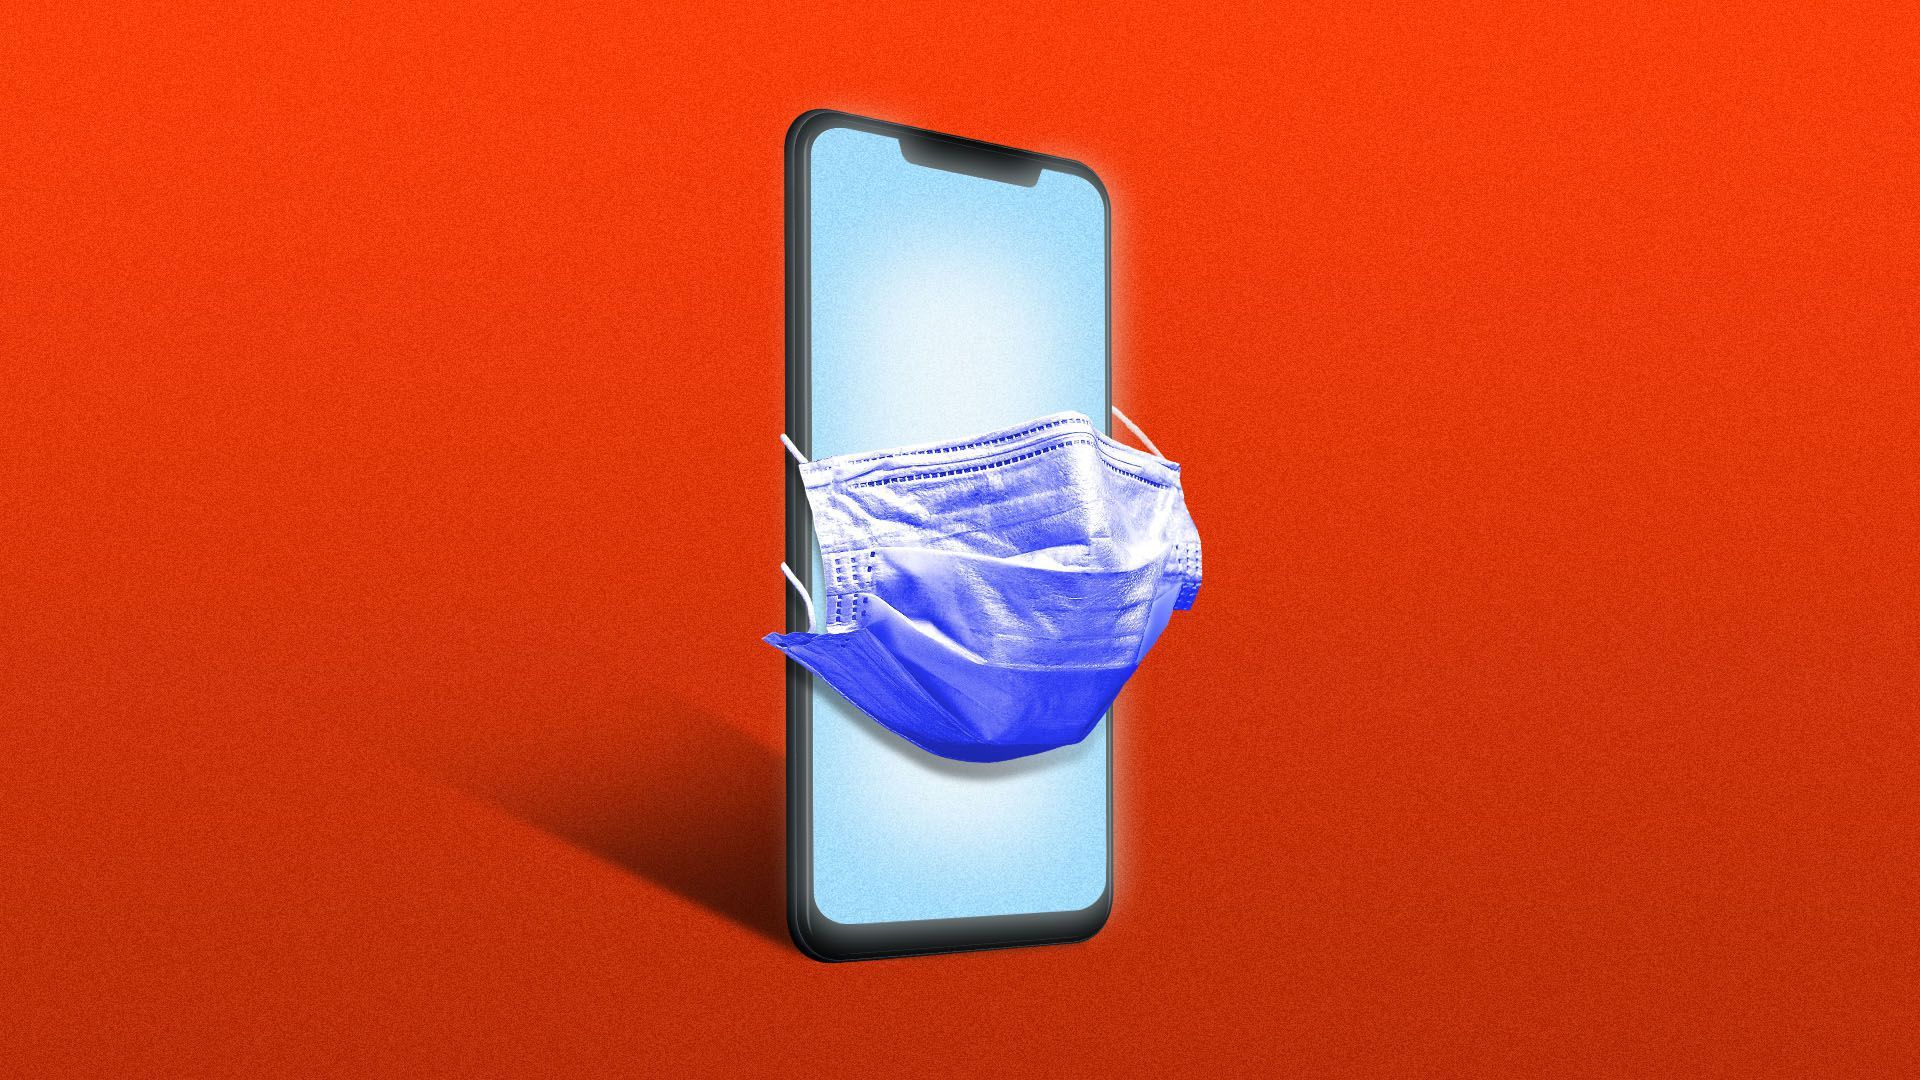 An illustration of an iPhone wearing a mask